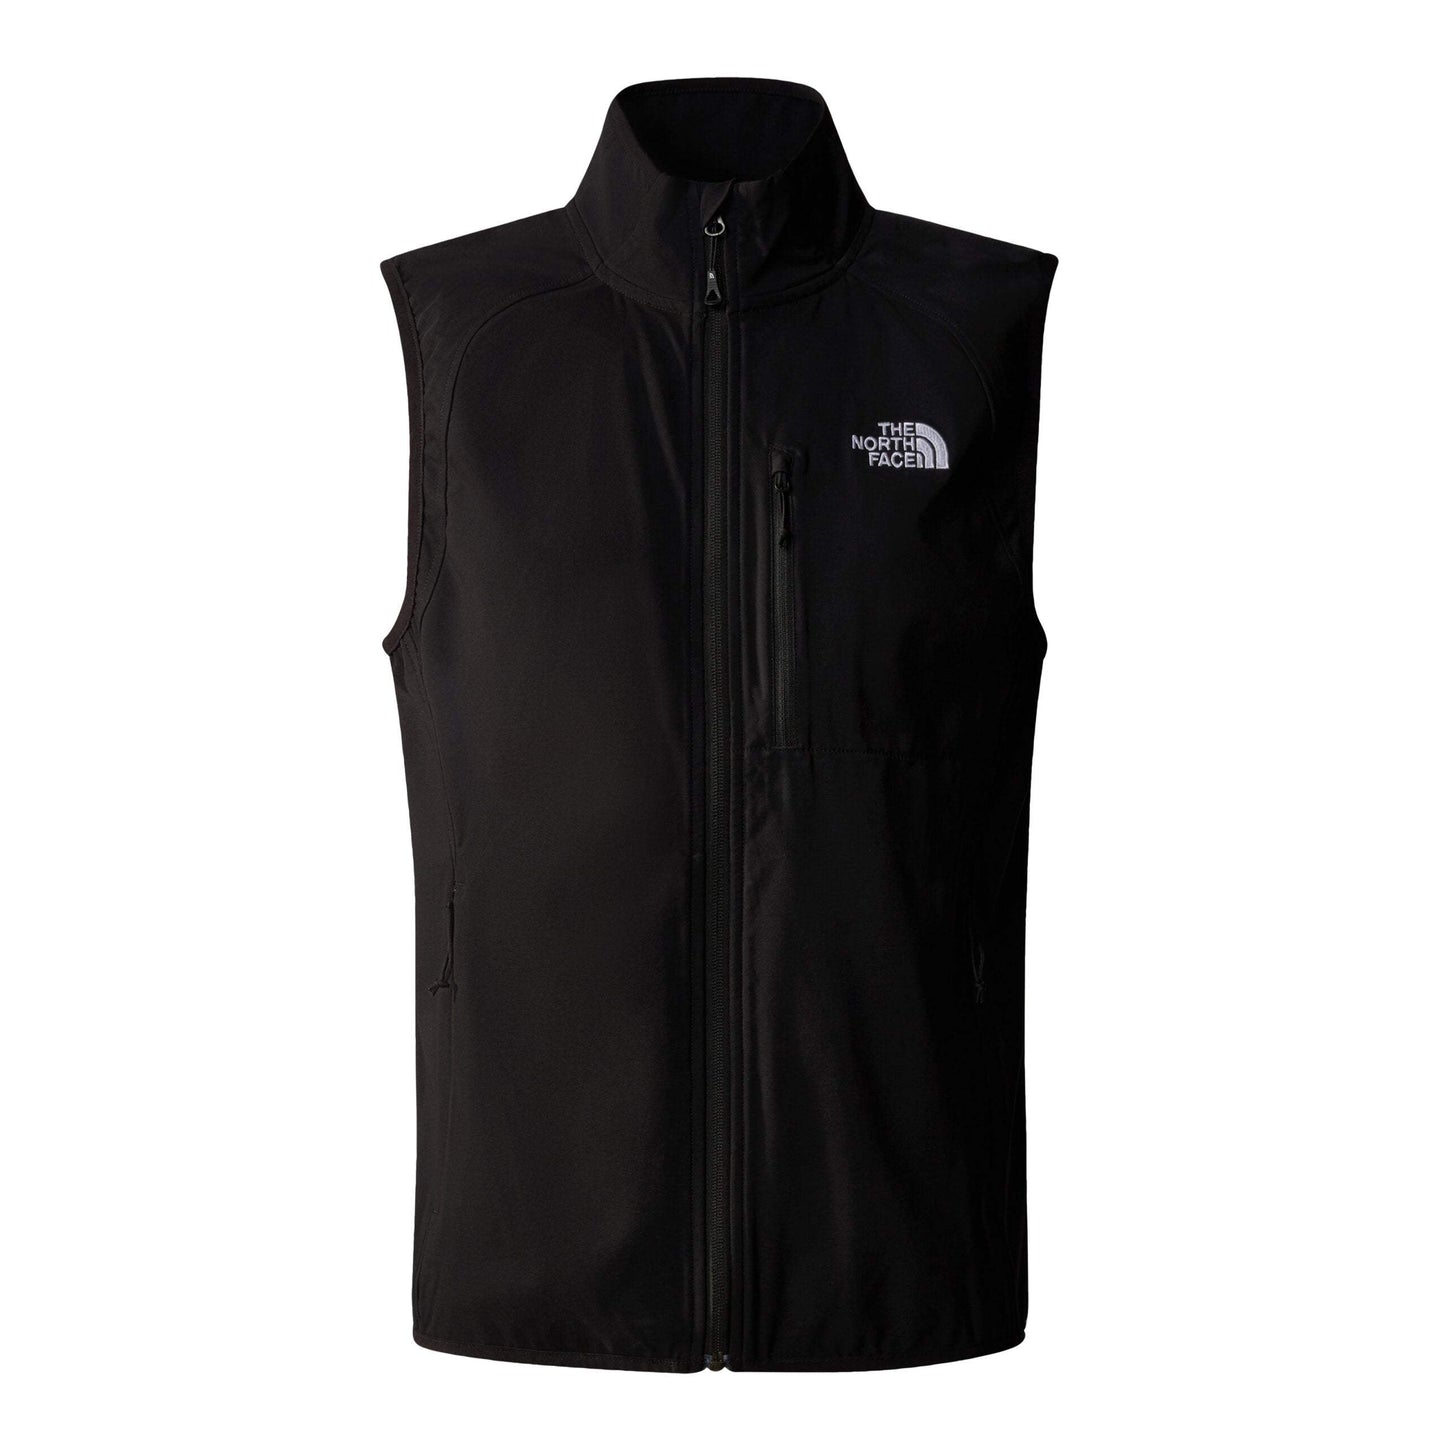 Men’s Nimble Vest by The North Face - Promotions Only Group Limited